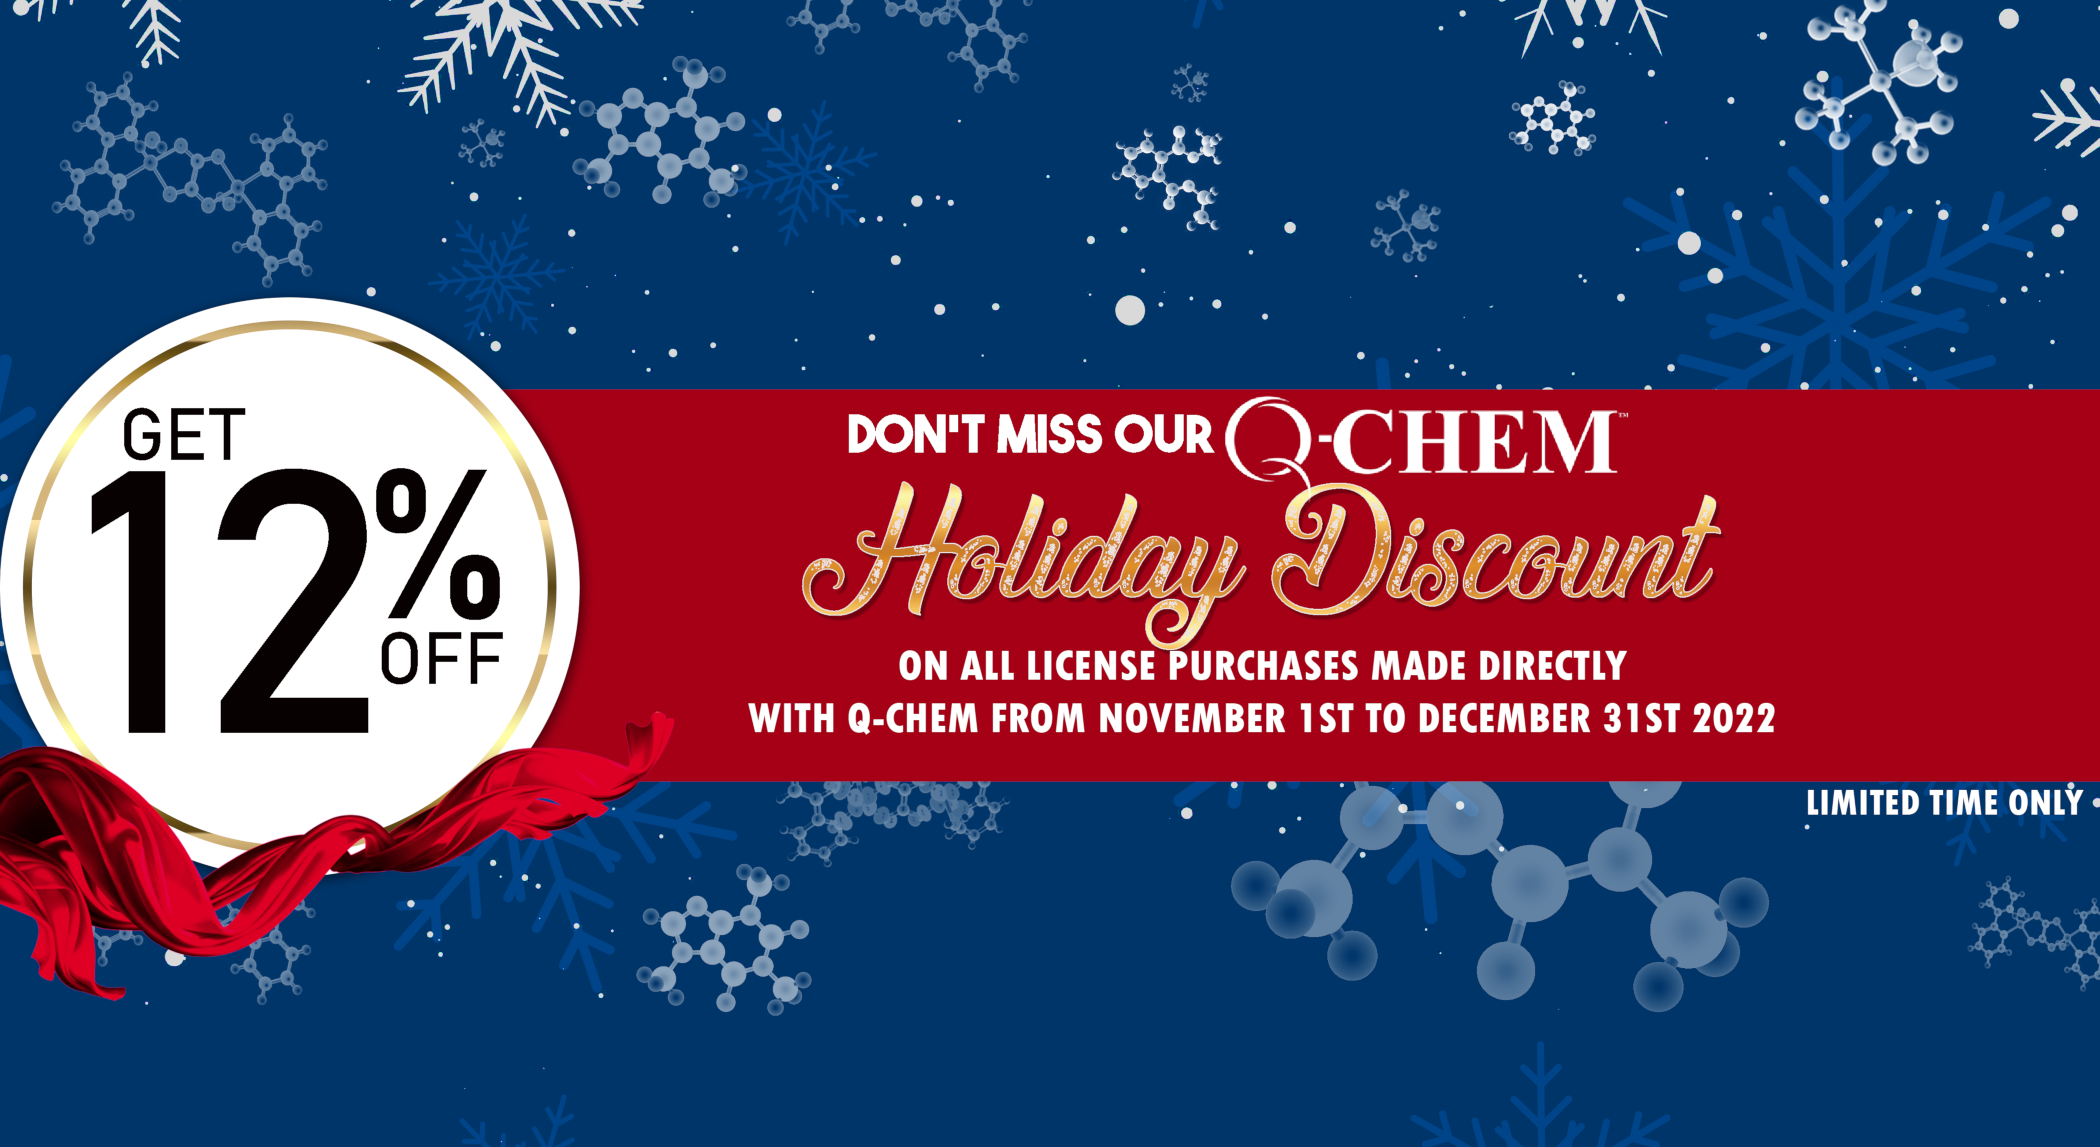 Q-Chem Holiday Discount: 12% off all license purchases made directly with Q-Chem through Dec 31, 2022